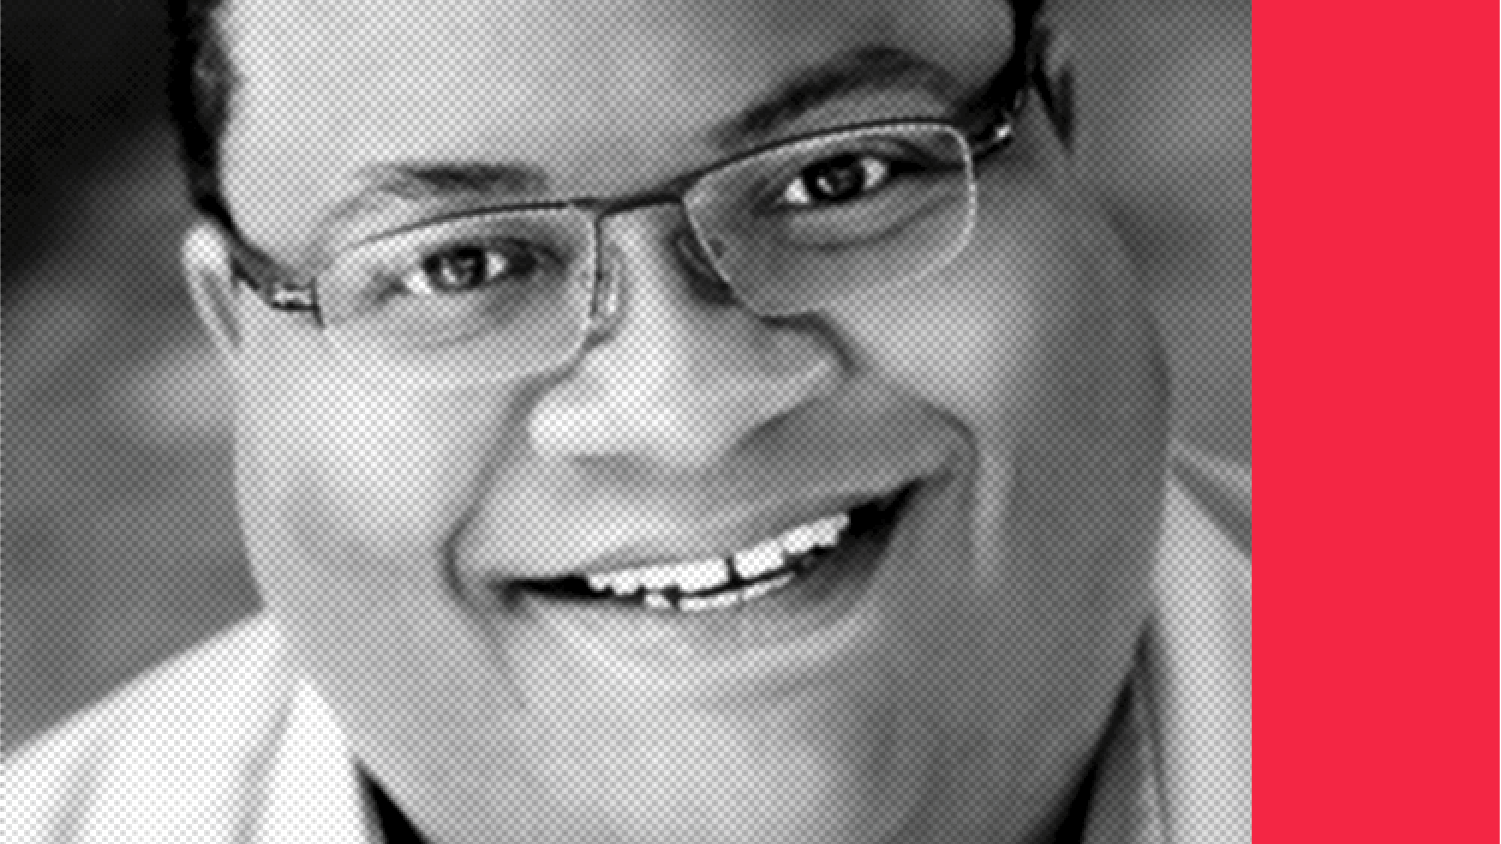 Headshot of a smiling person of medium skin tone, with short black hair, and wearing thin framed glasses and a white shirt.